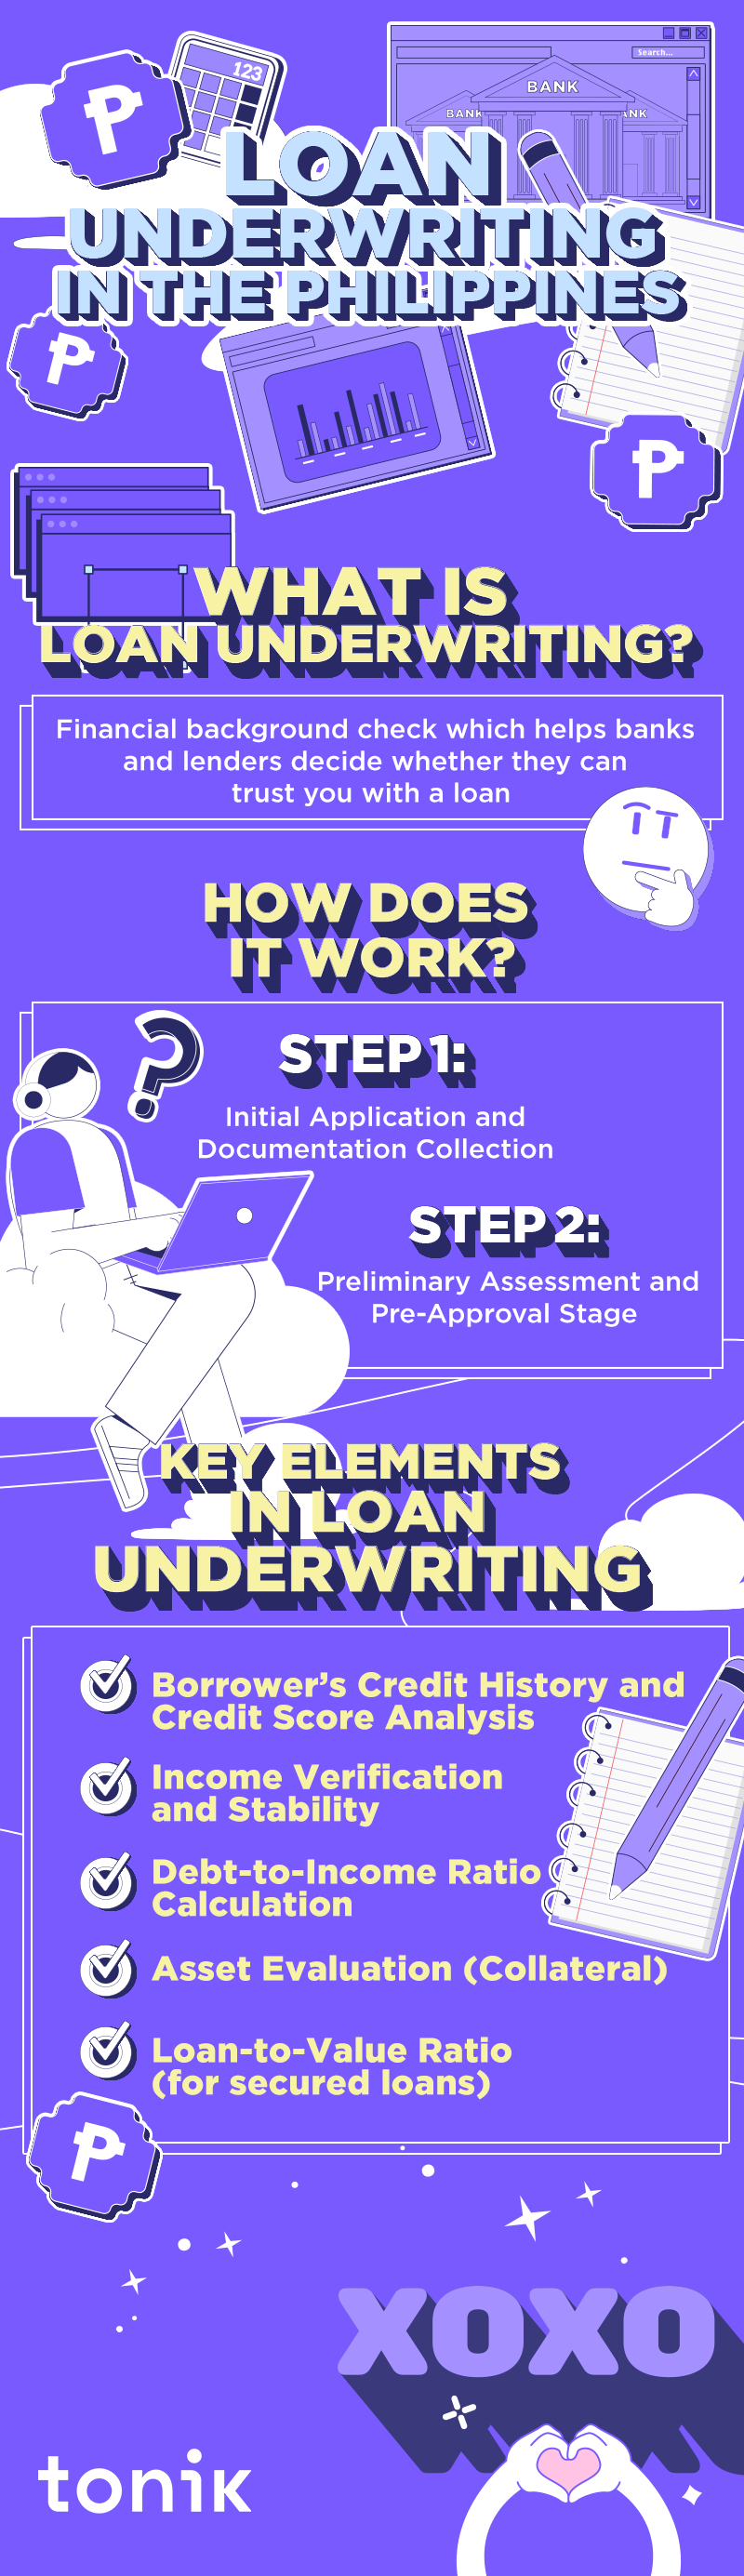 infographic on loan underwriting in the Philippines